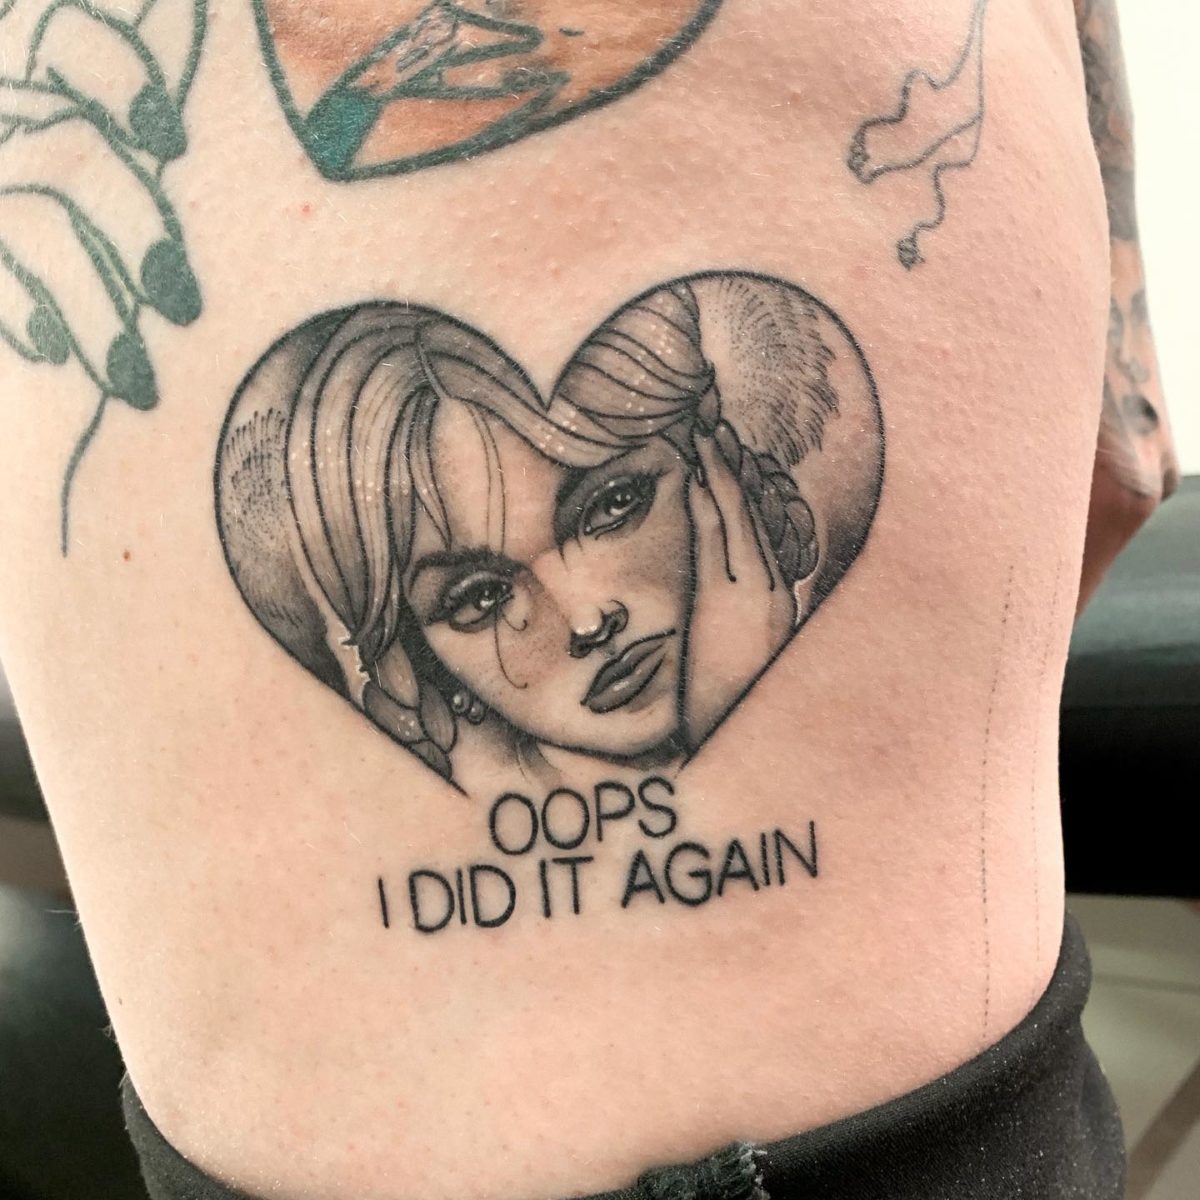 Britney Spears Just Got Three Post-Break-Up Tattoos: See Them and More Like Them | Breaking up is hard to do, but tattoos make it easier. See Britney Spears' new ink and other examples that are similar.